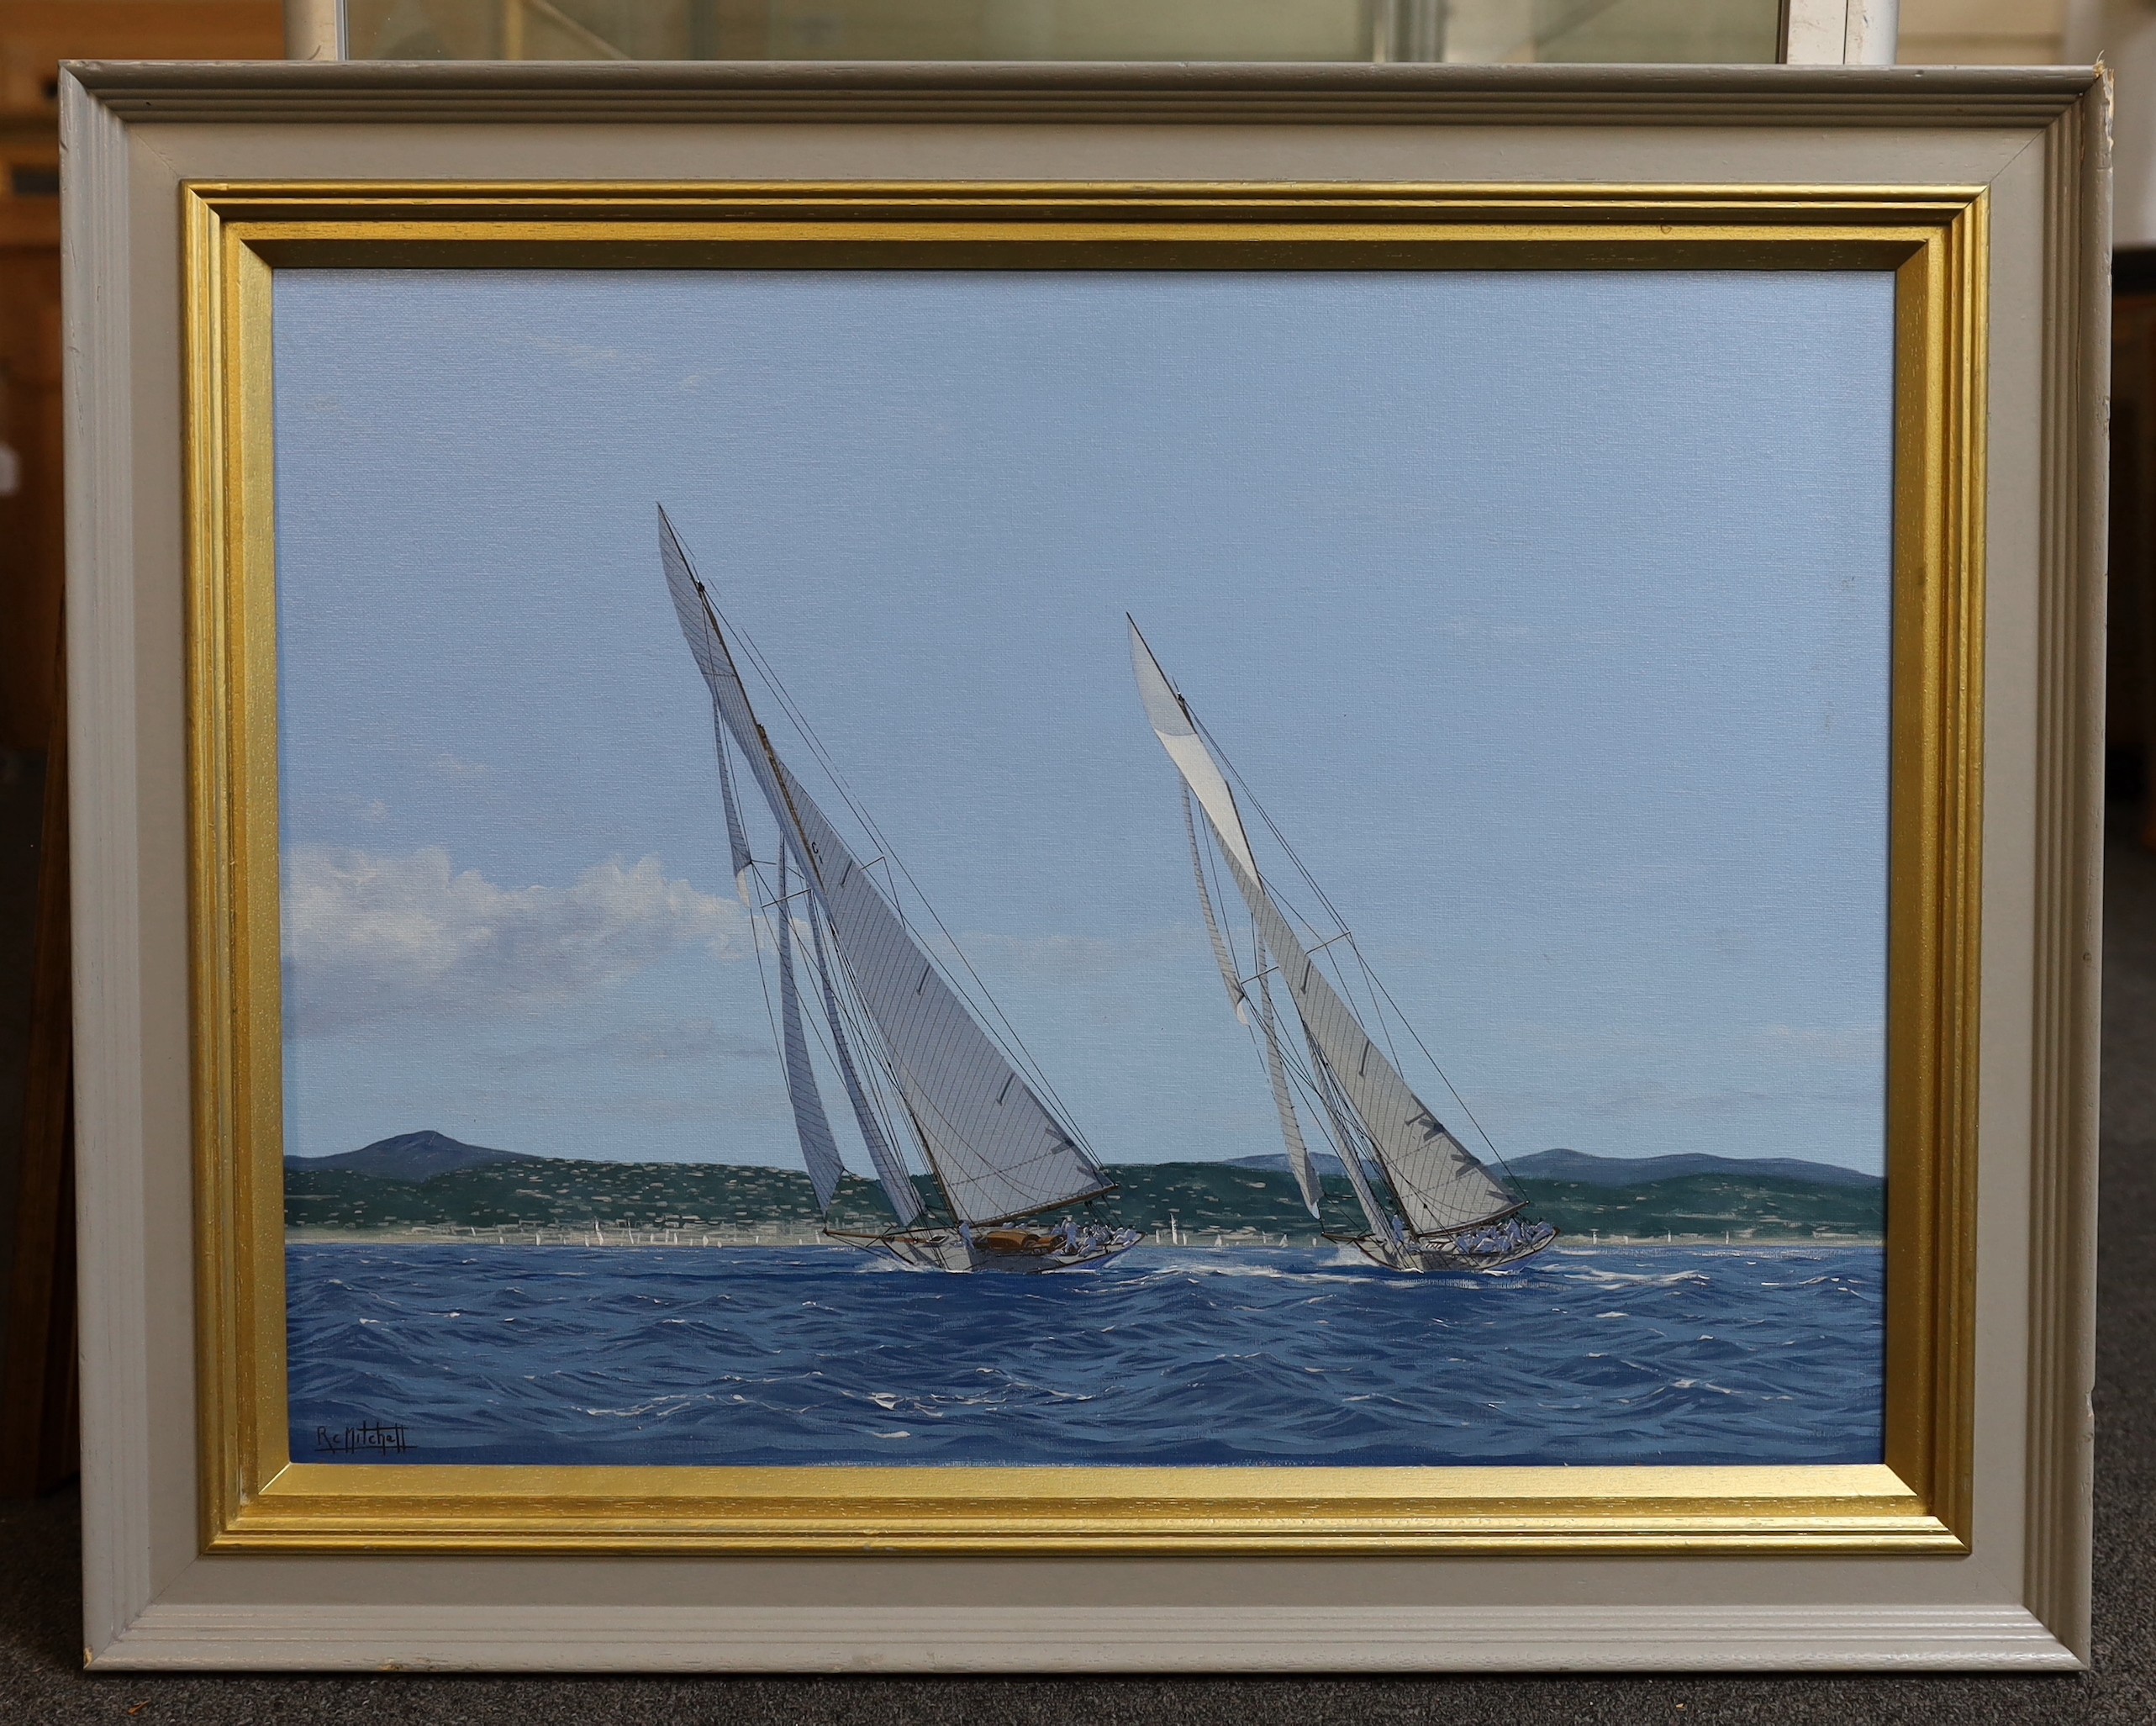 Ron Charles Mitchell (1960-), oil on canvas, 'Marquita & Tuiga racing, Regatta Royales, Cannes', signed, 45 x 60cm